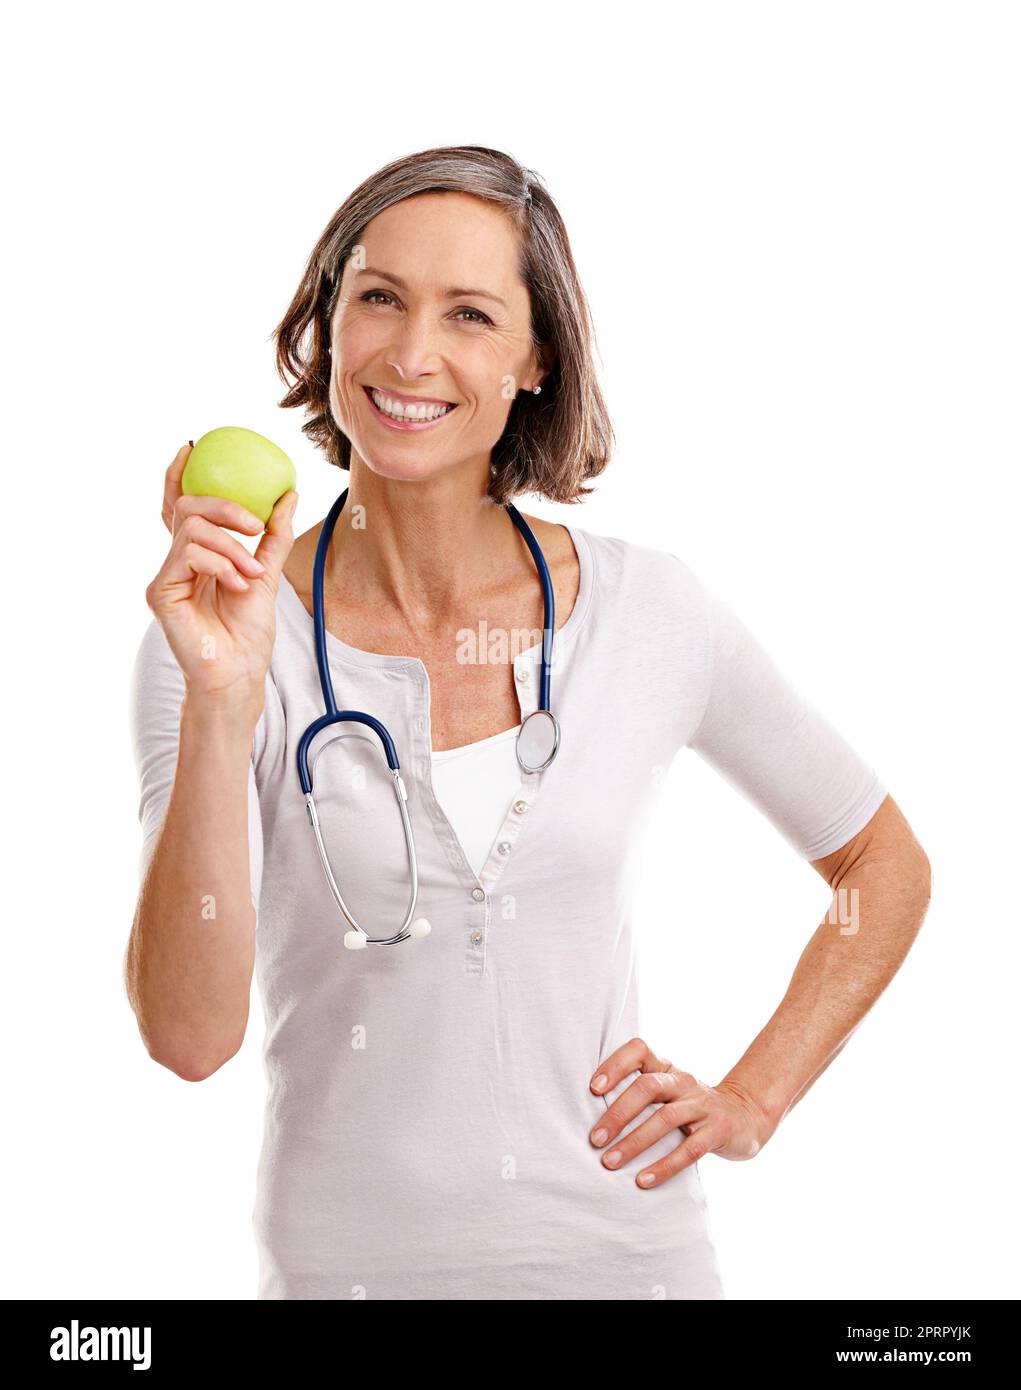 Promoting a healthy lifestyle. Cropped studio portrait of a mature female doctor holding an apple. Stock Photo